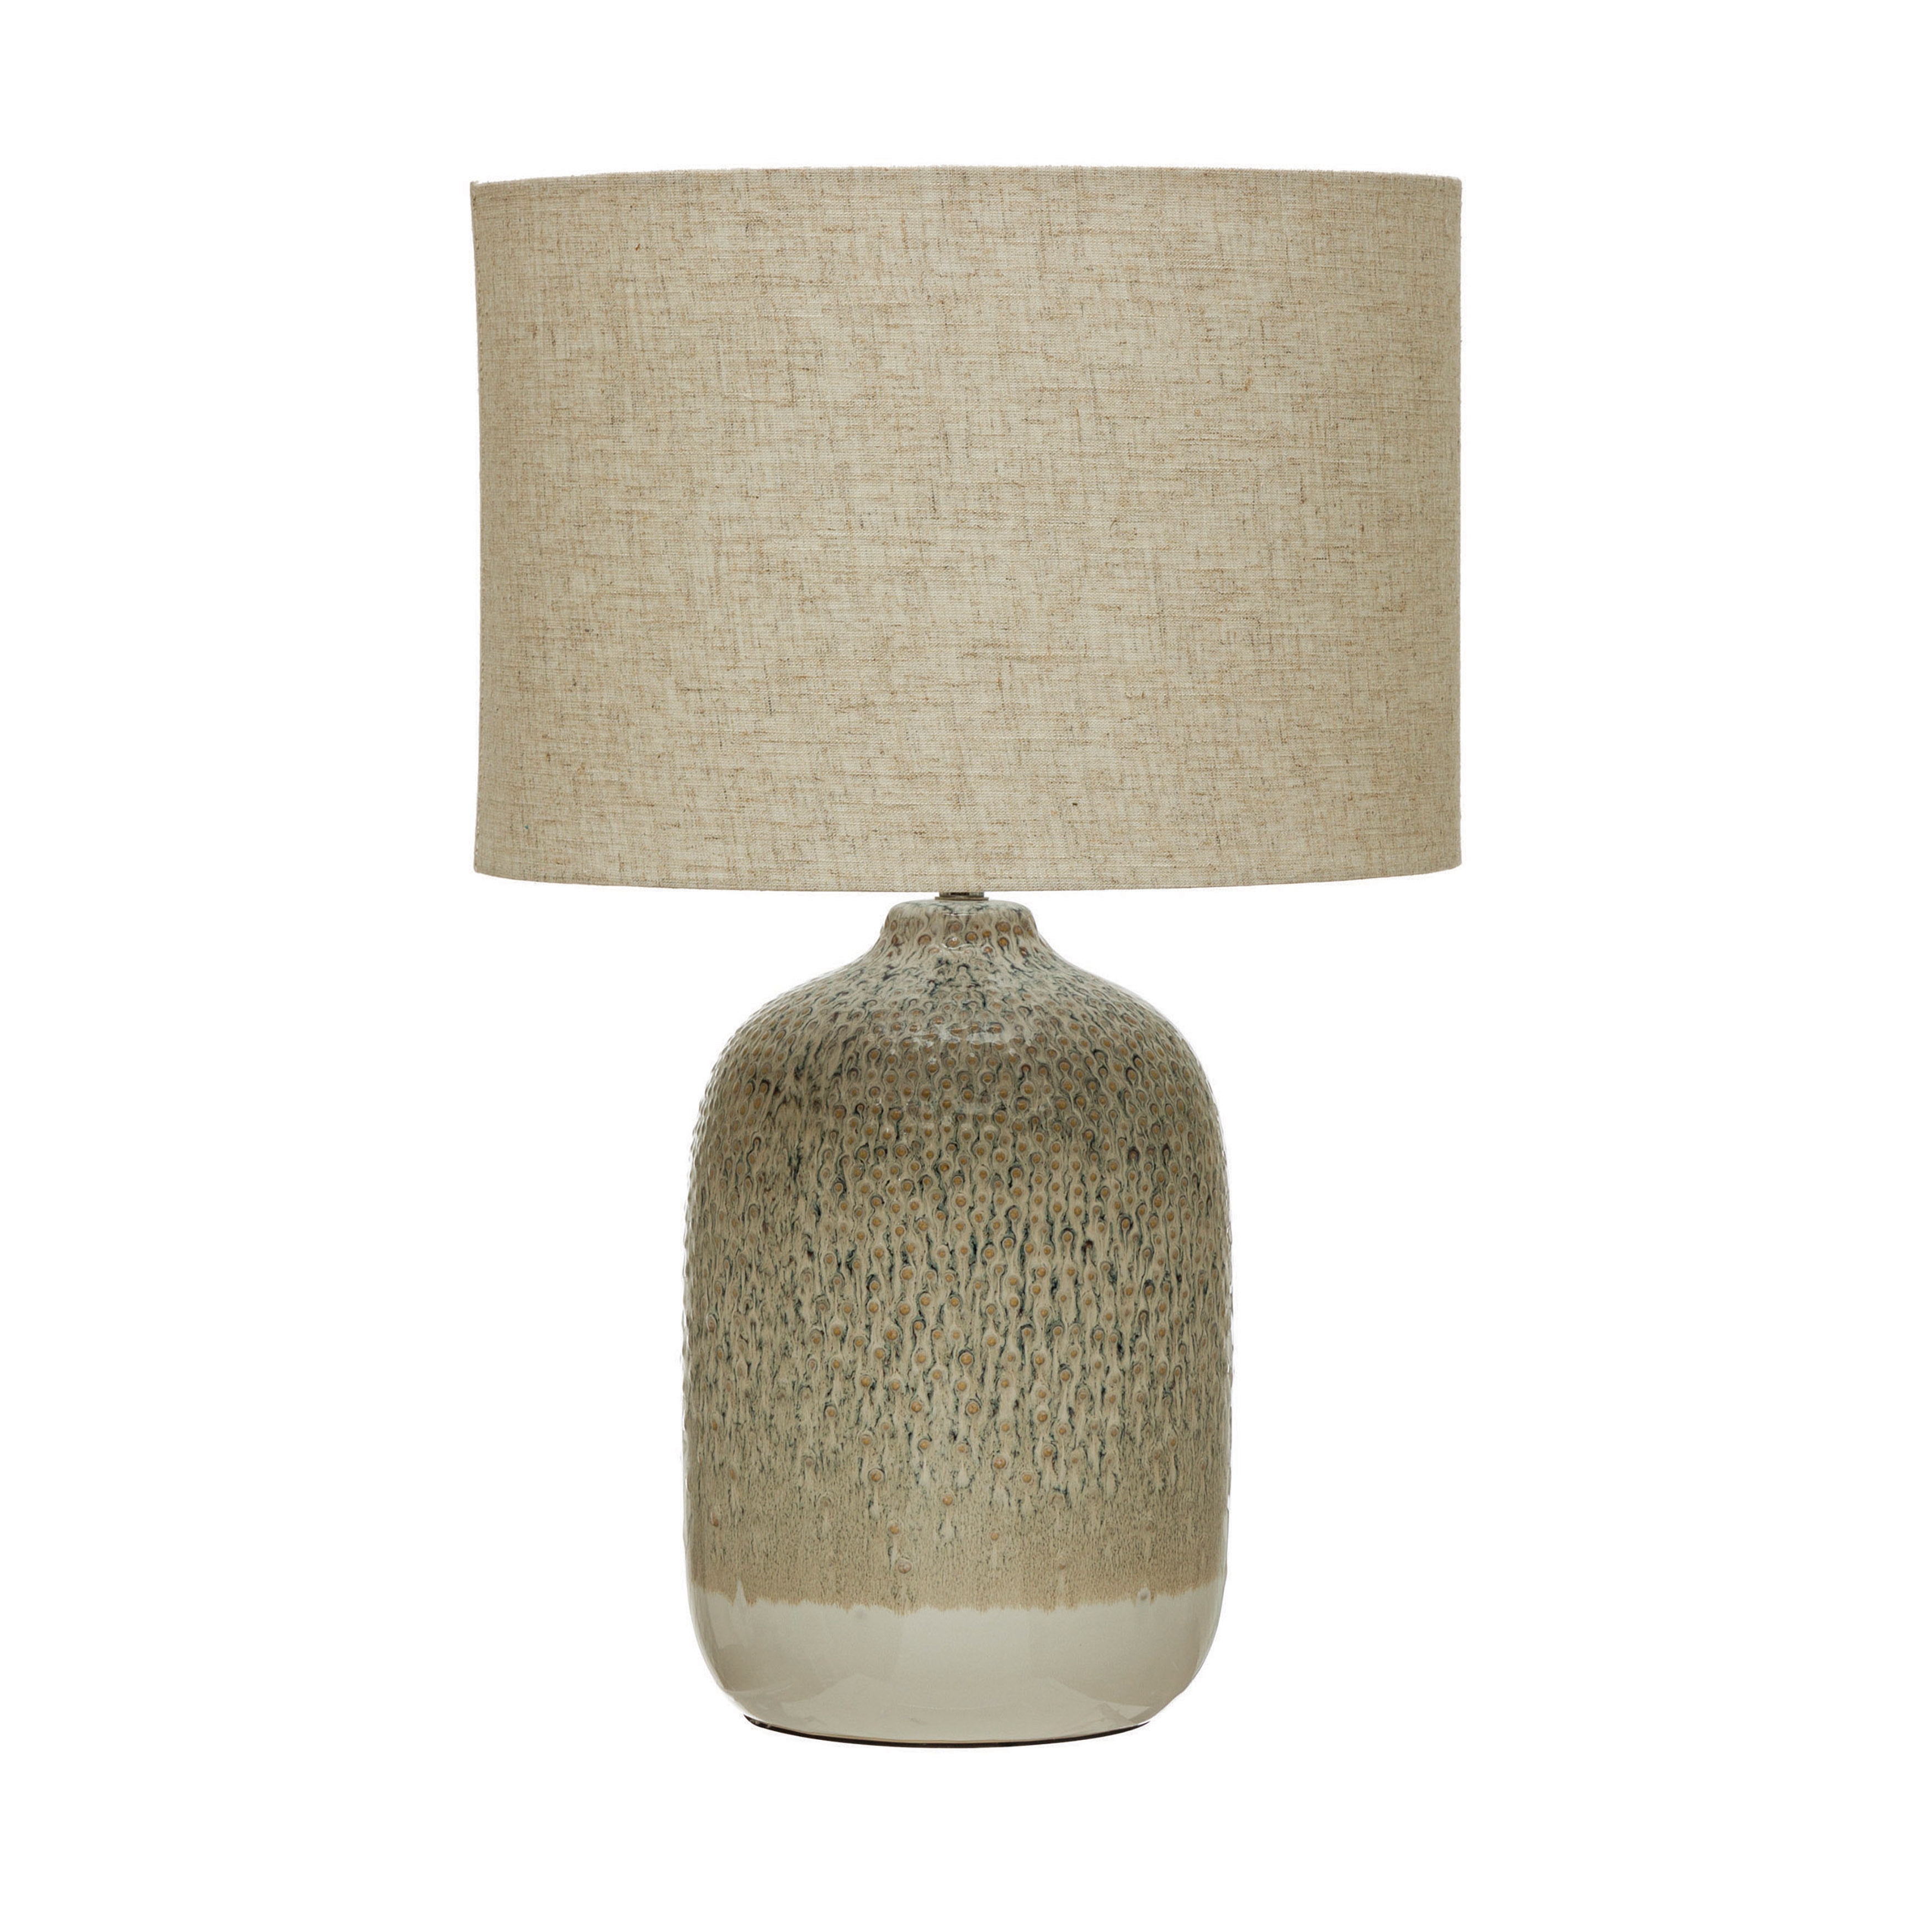  Stoneware Table Lamp with Linen Shade, Taupe Reactive Glaze - Image 0